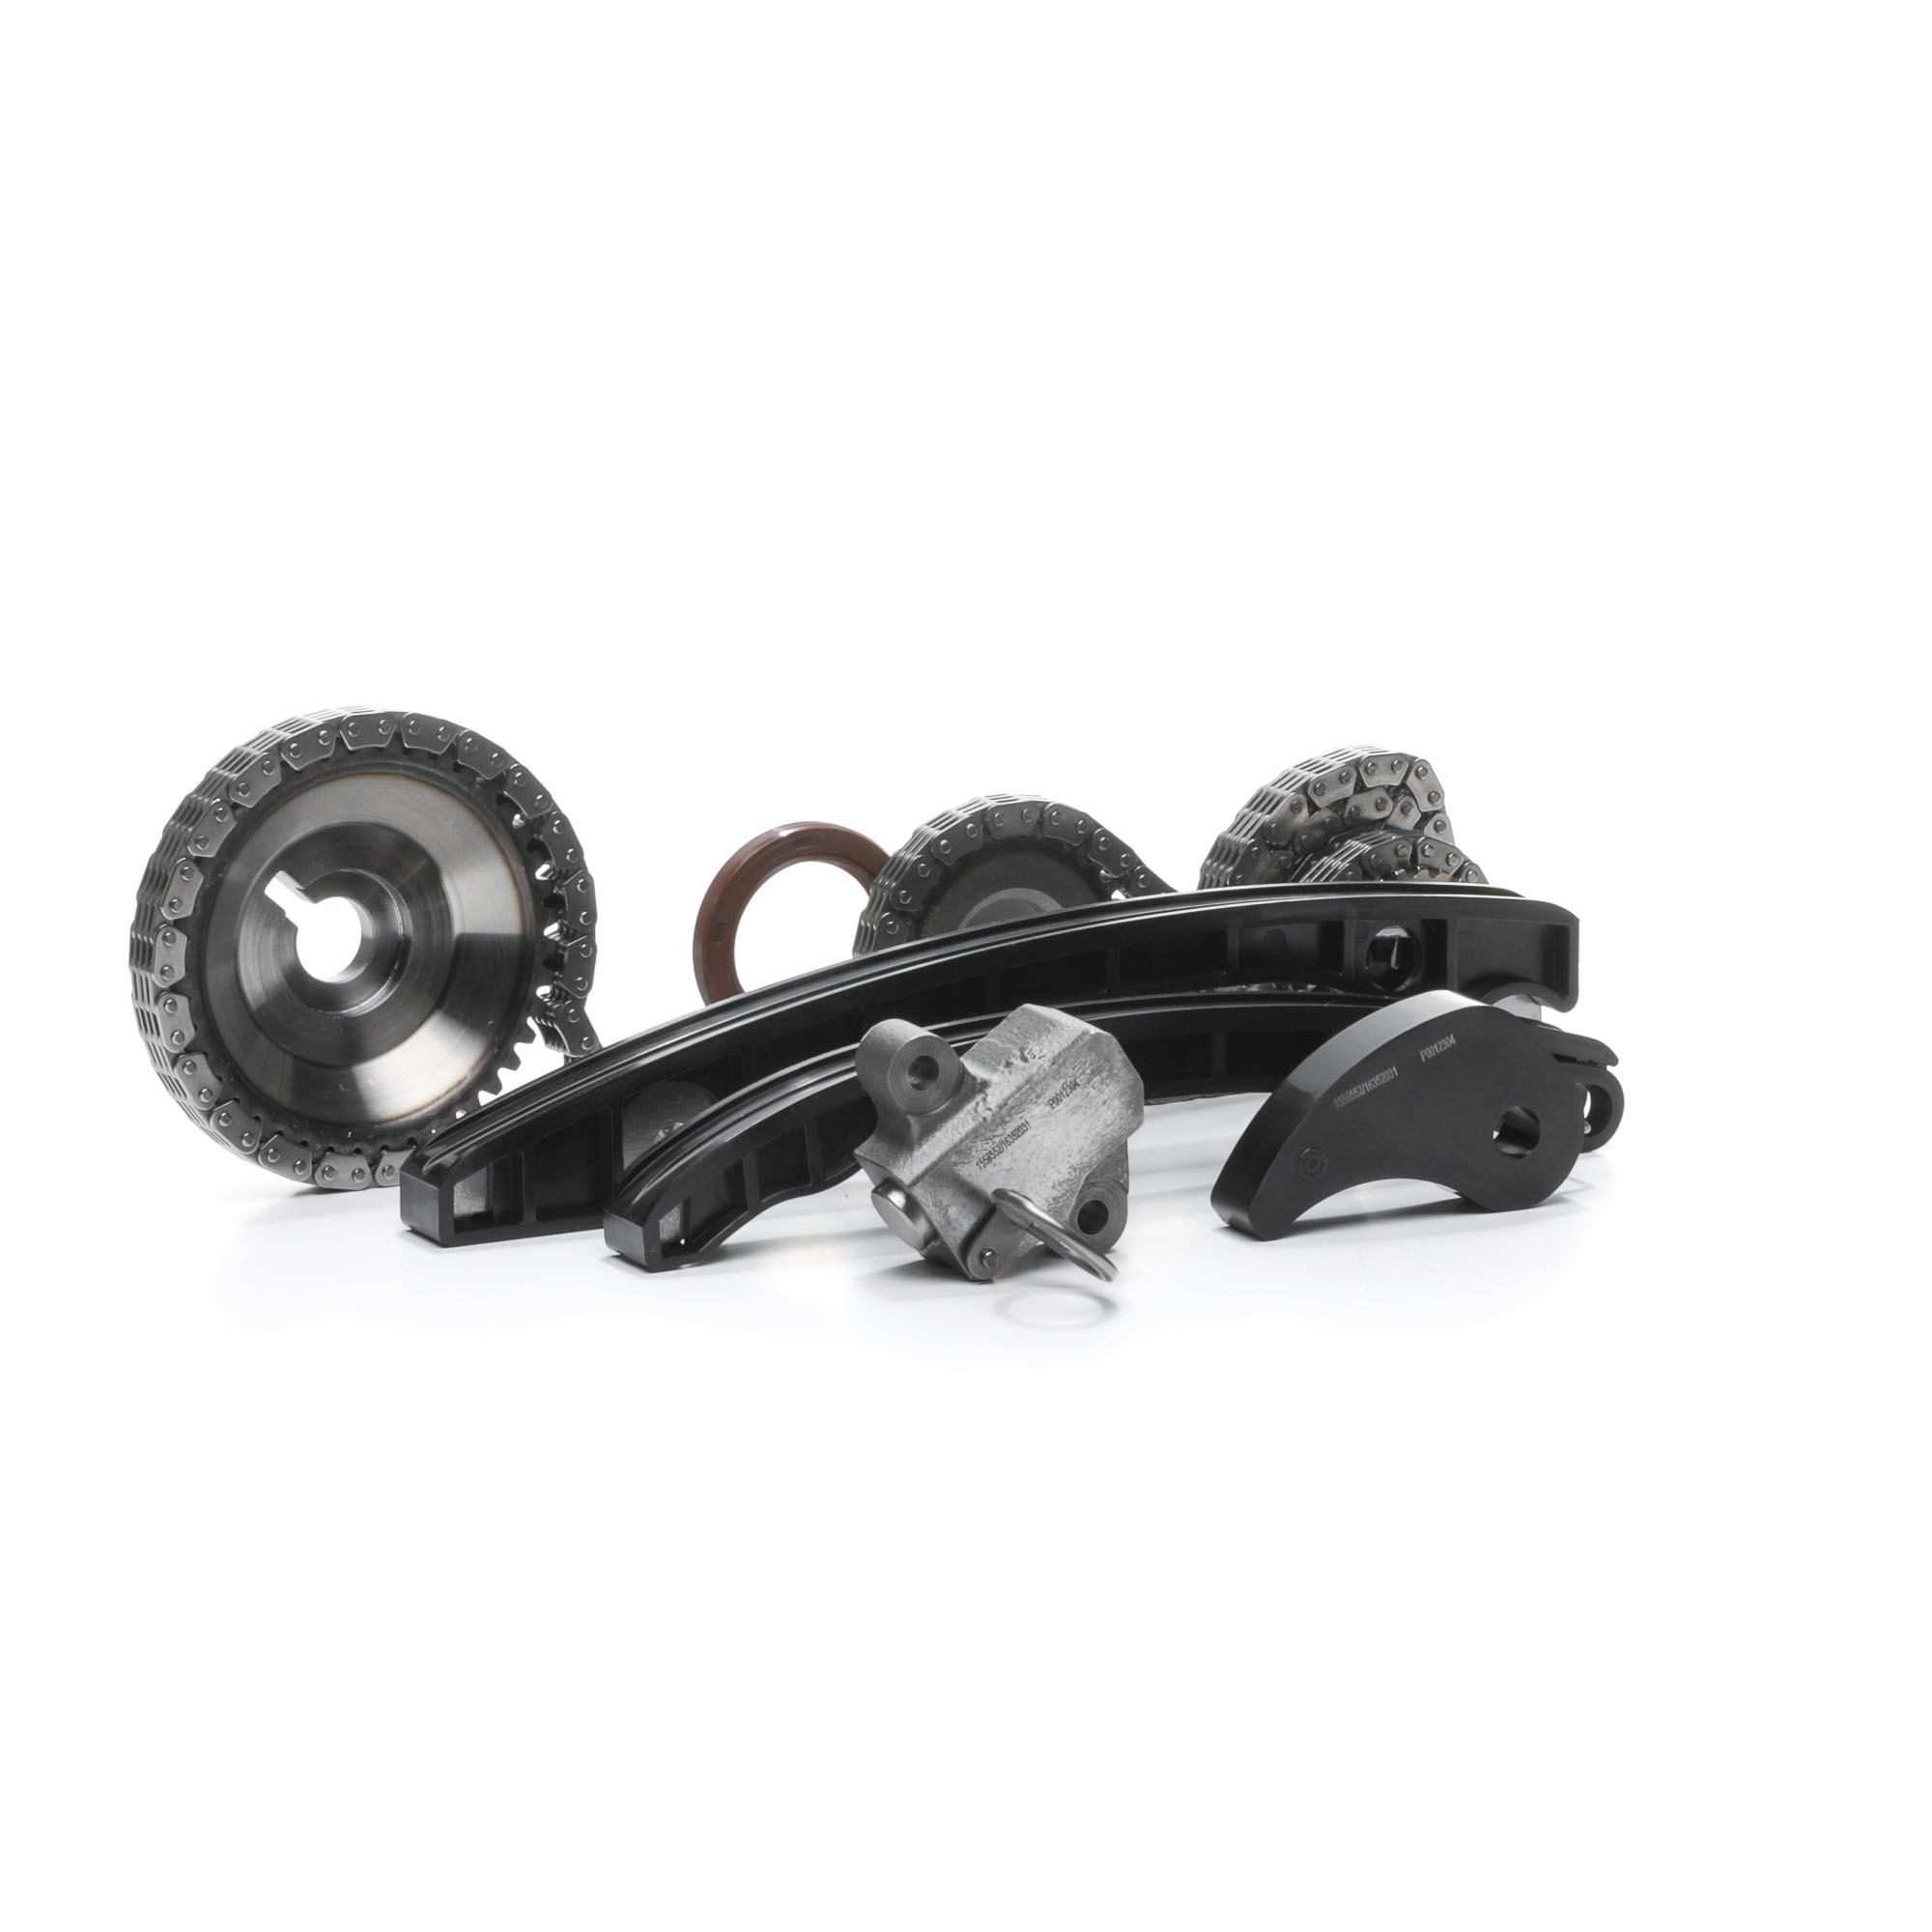 RIDEX 1389T2549 Timing chain kit with gaskets/seals, with gears, Simplex, Low-noise chain